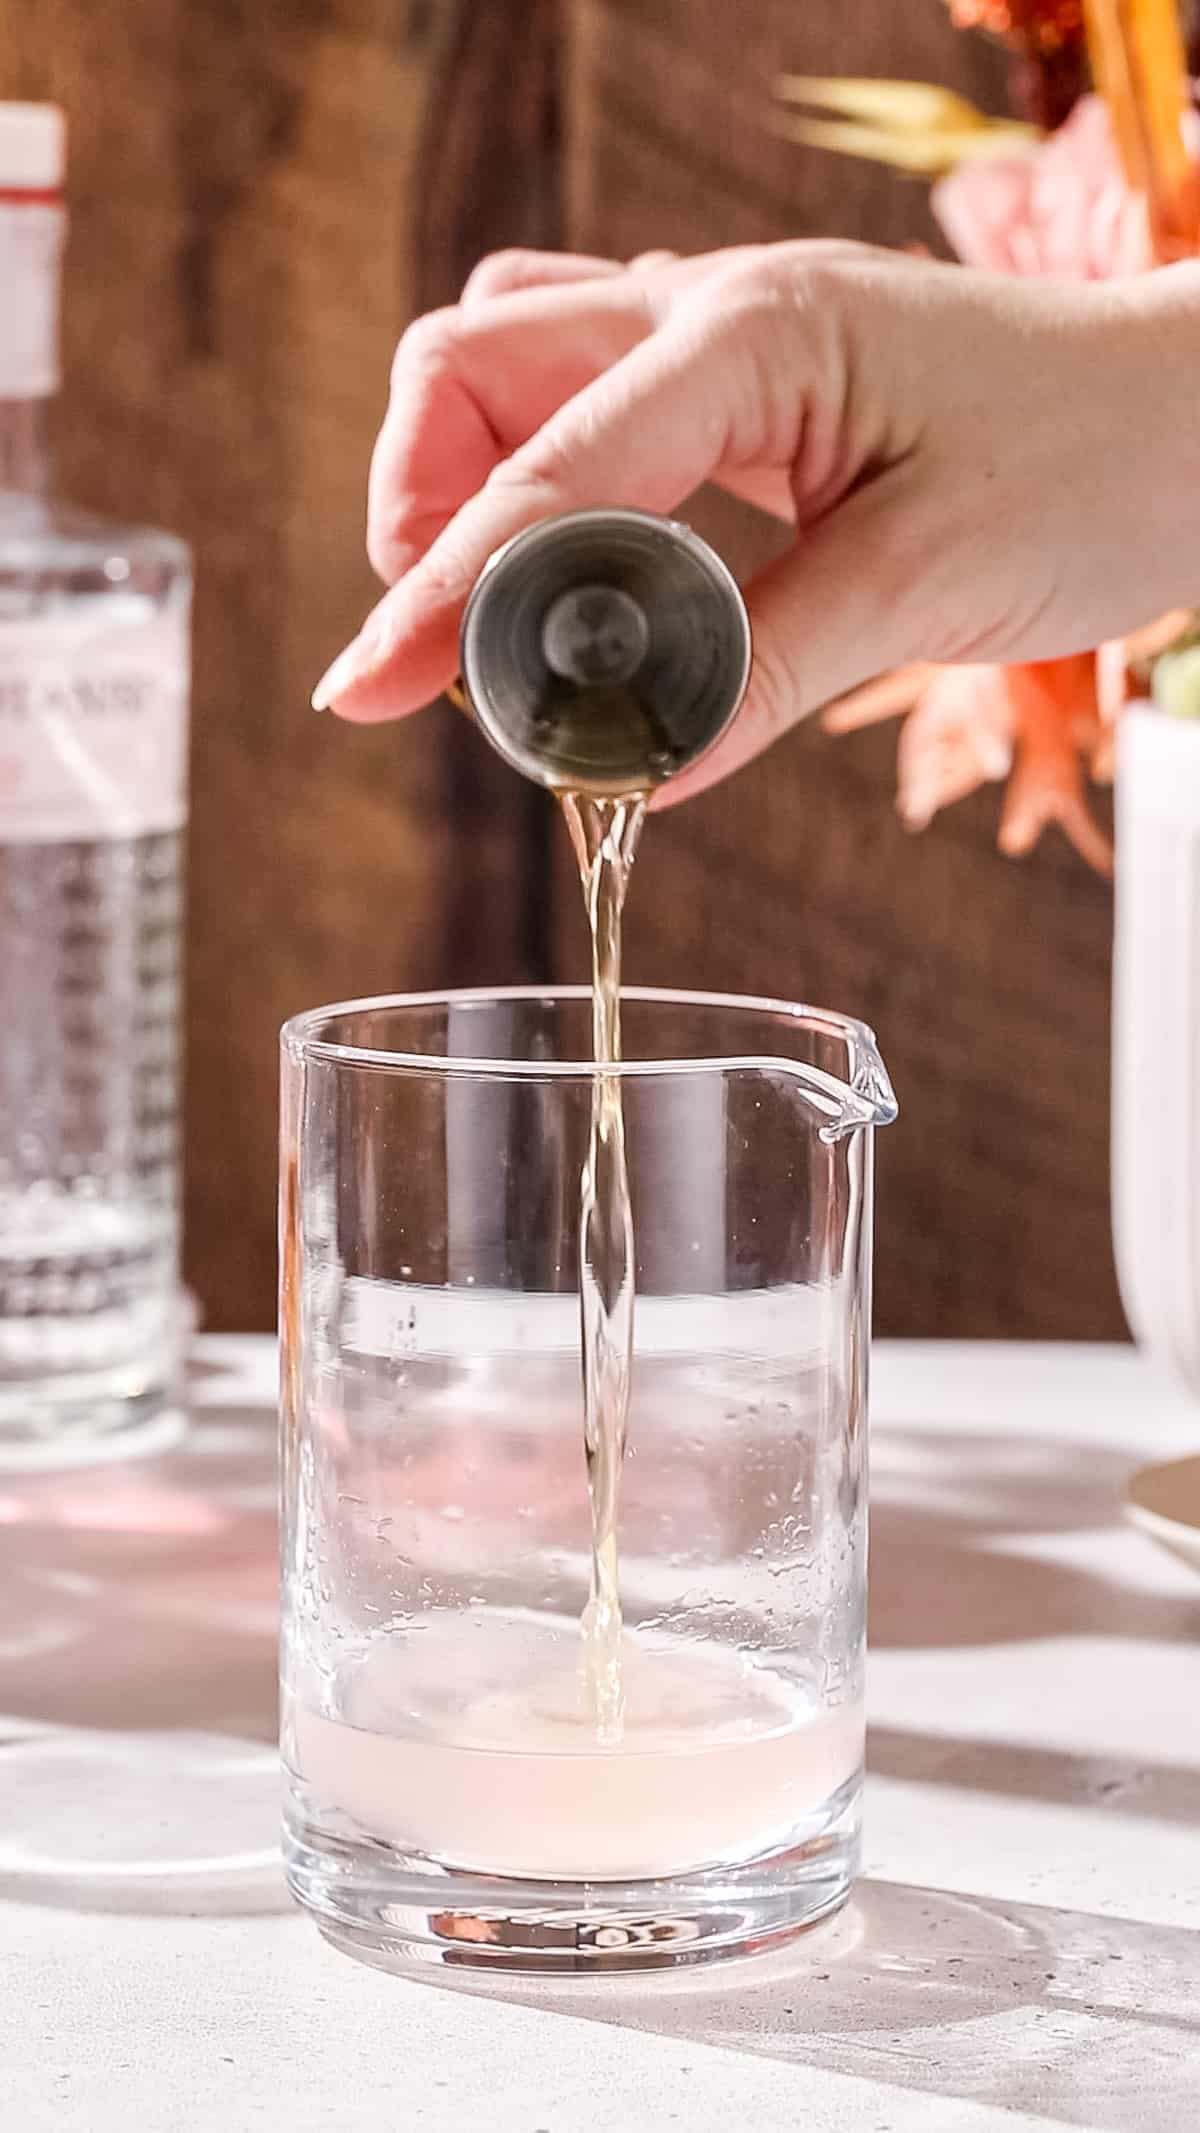 Hand pouring dry vermouth into a cocktail mixing glass.